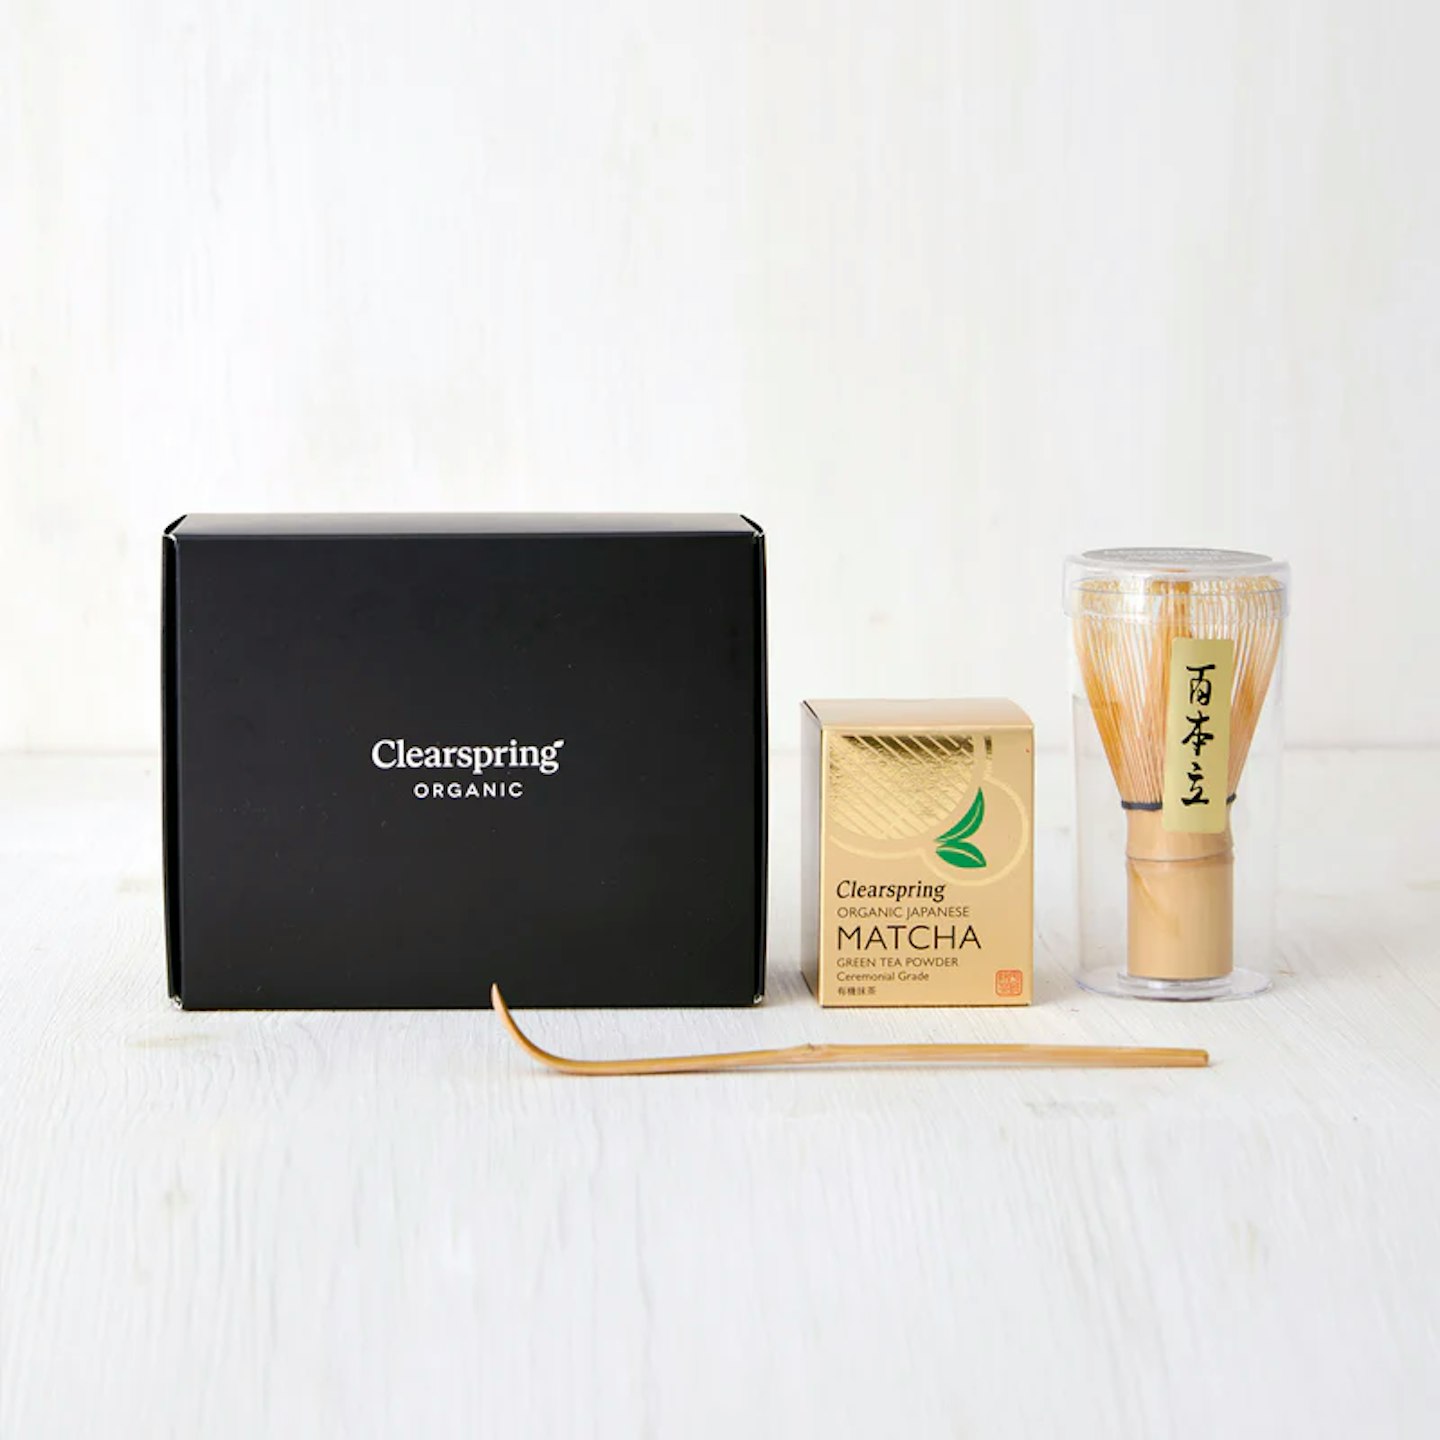 Clearspring Organic - gifts for foodies